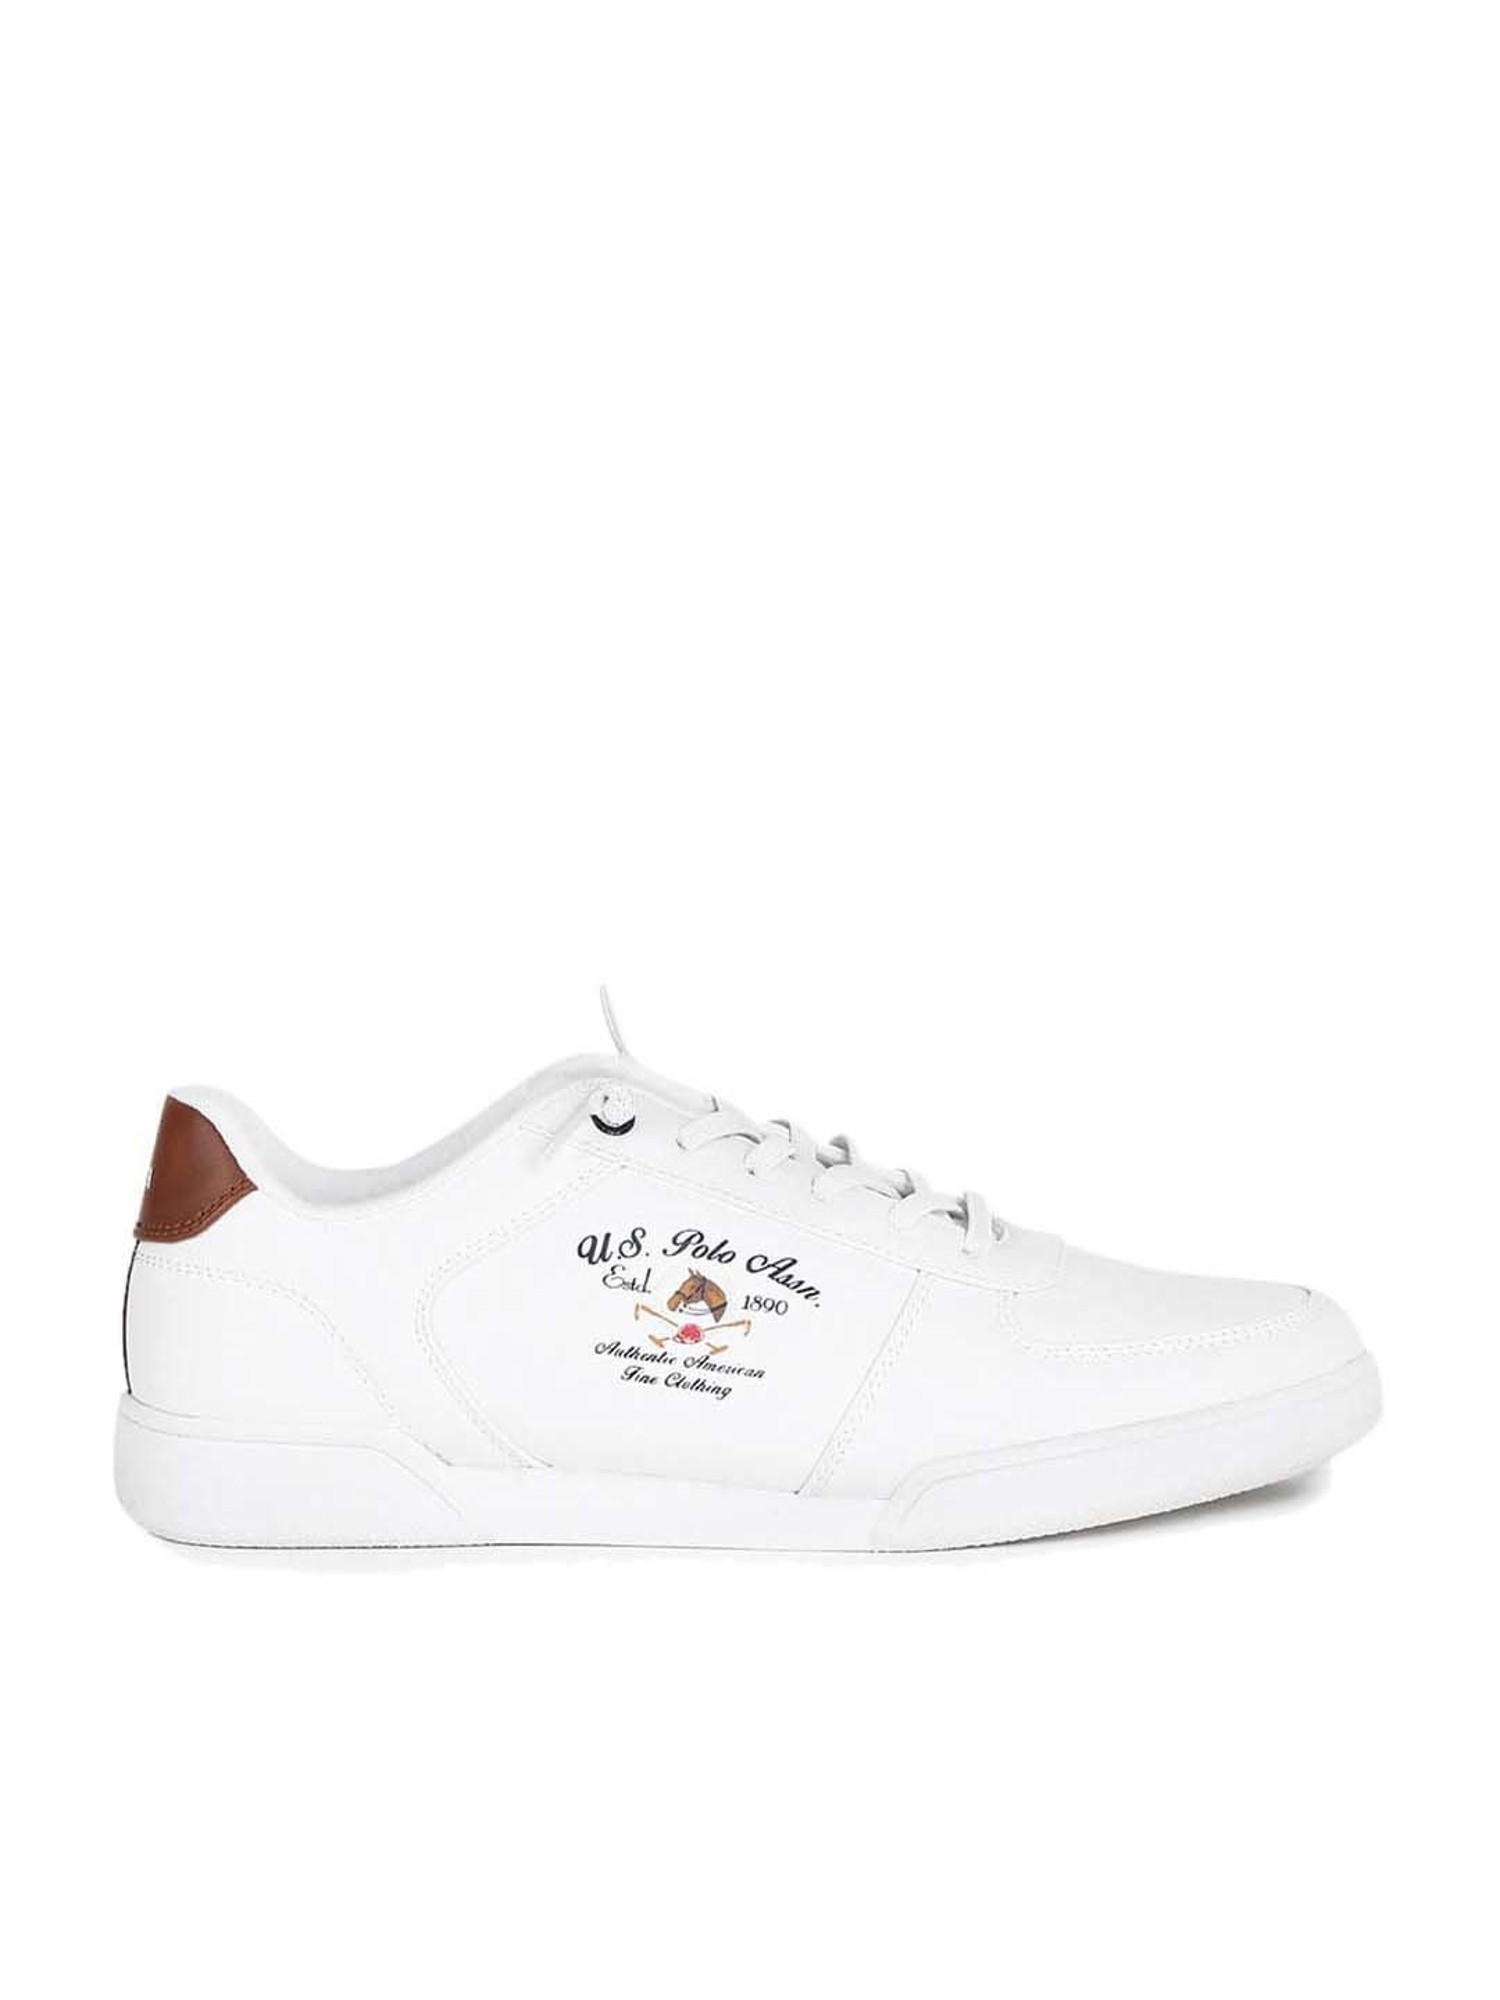 Details more than 209 white polo sneakers